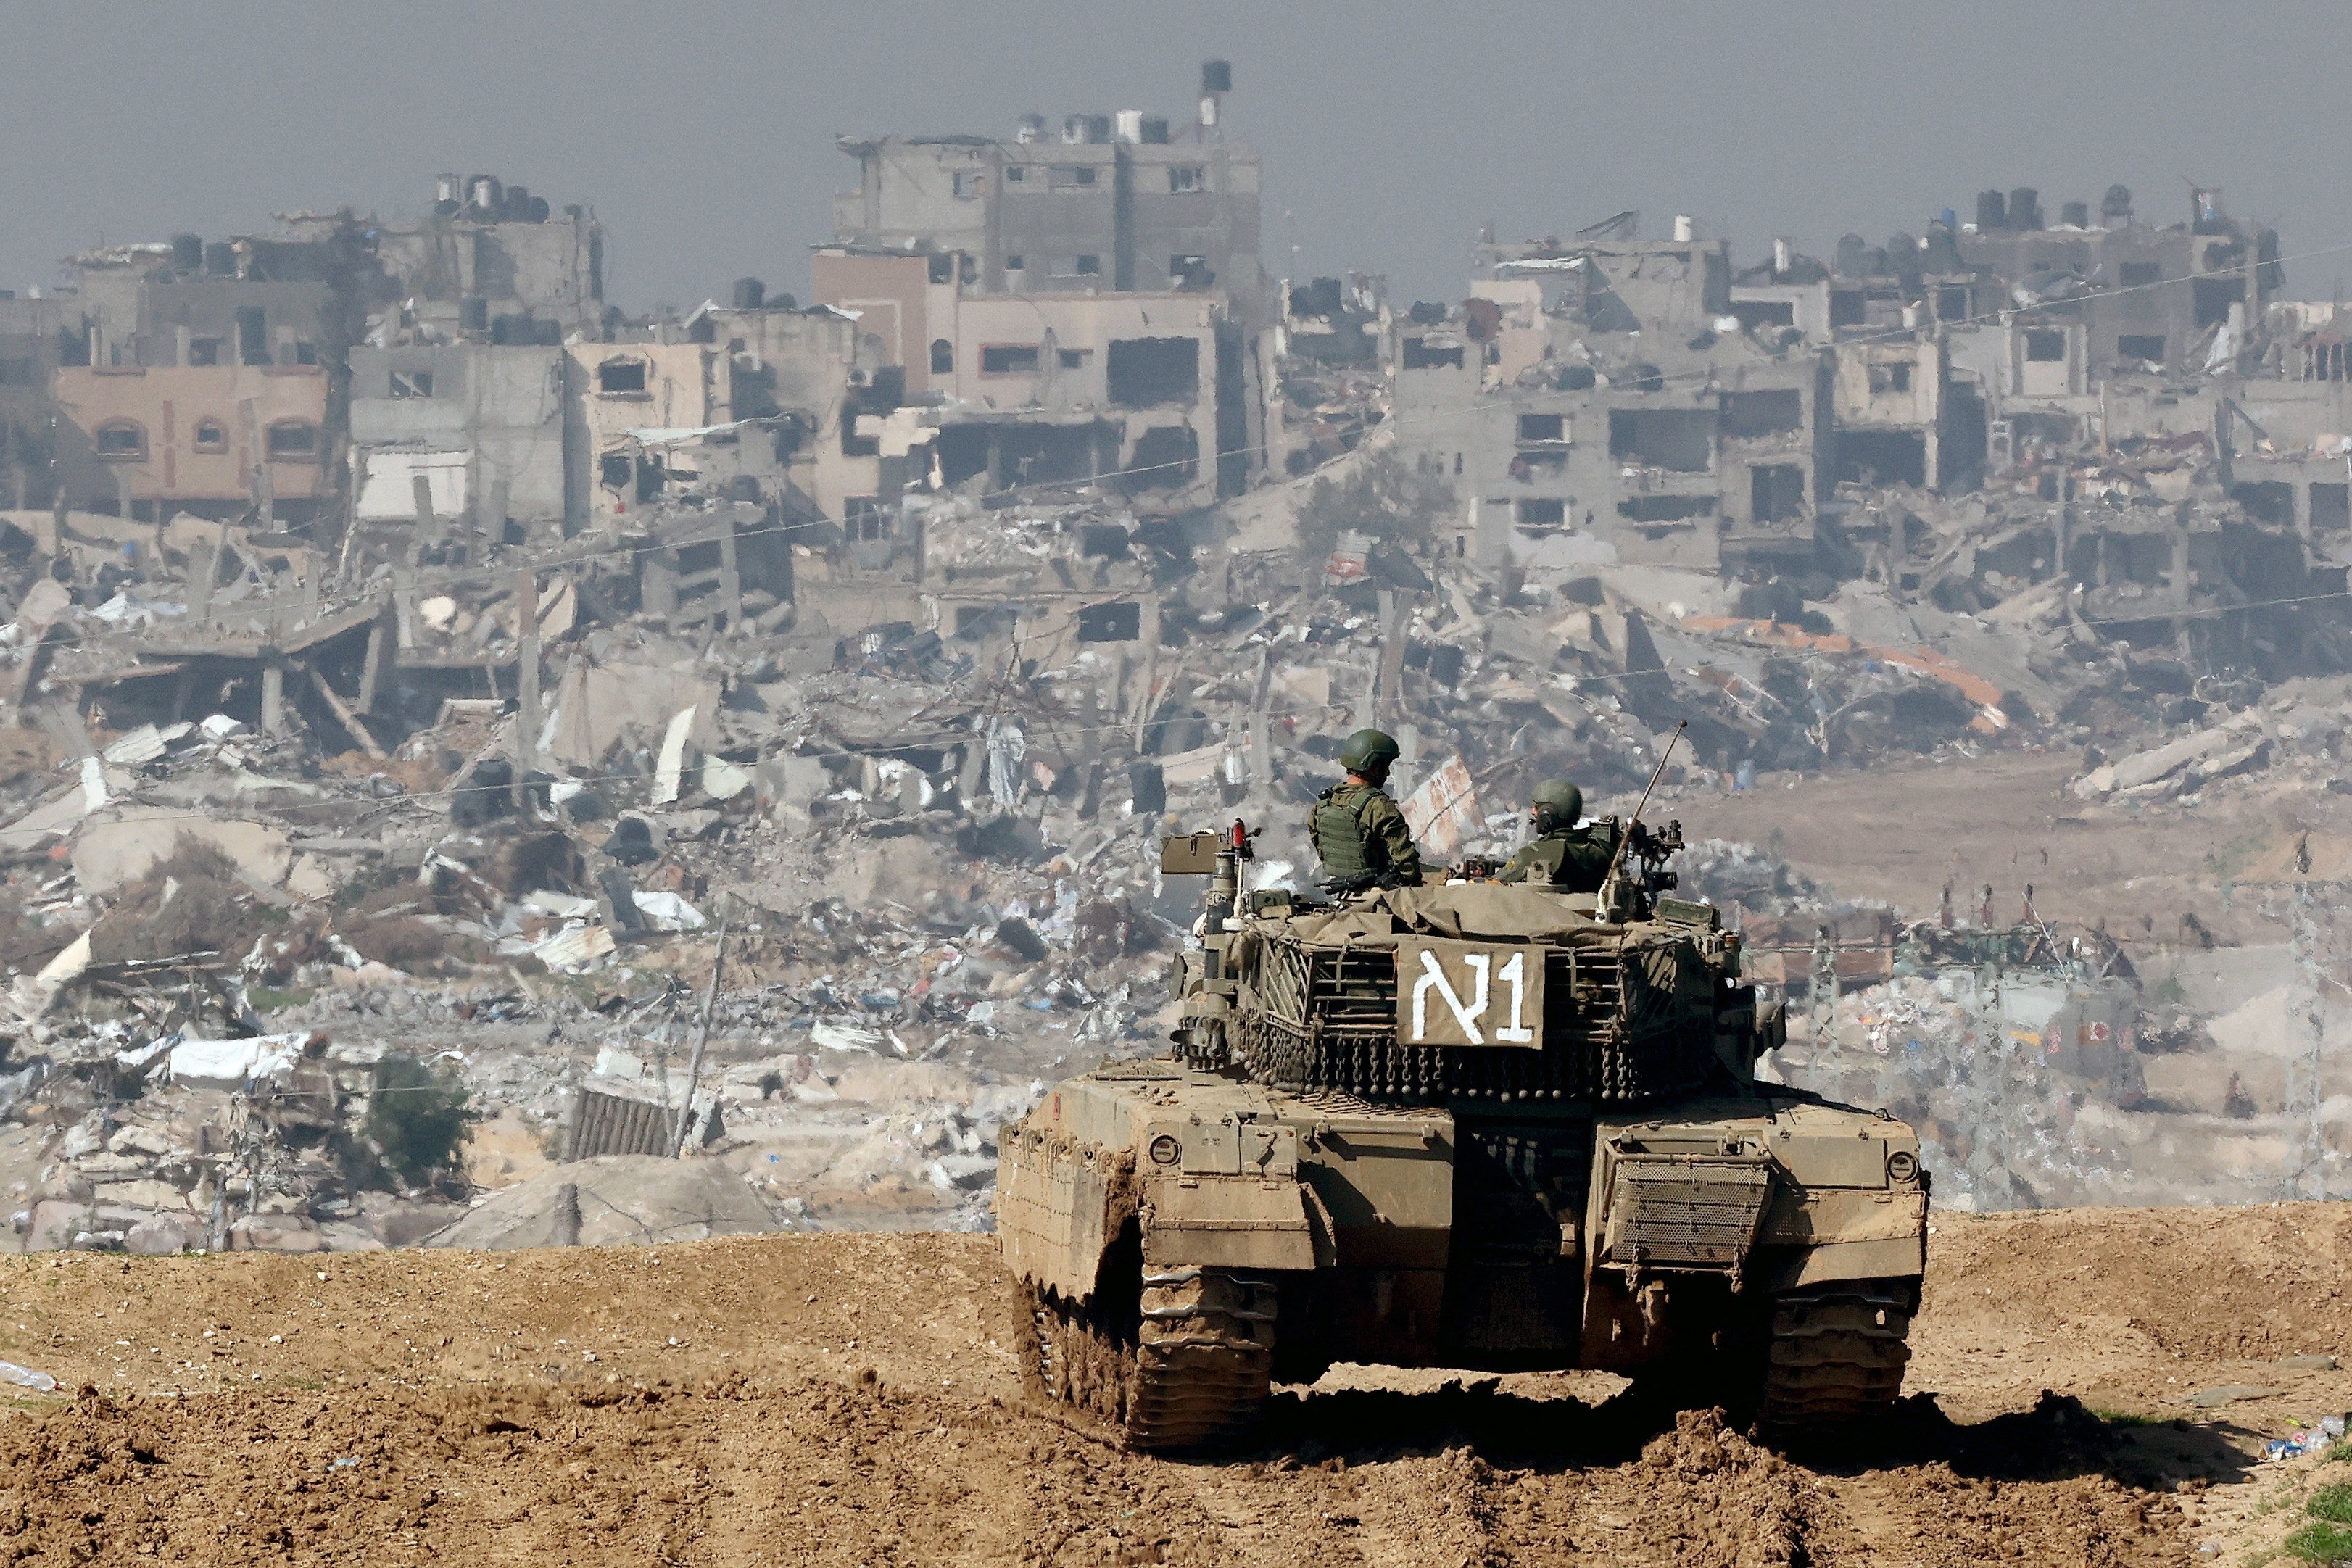 An Israeli tank and damaged buildings in the Gaza Strip in the background. Photo: AFP